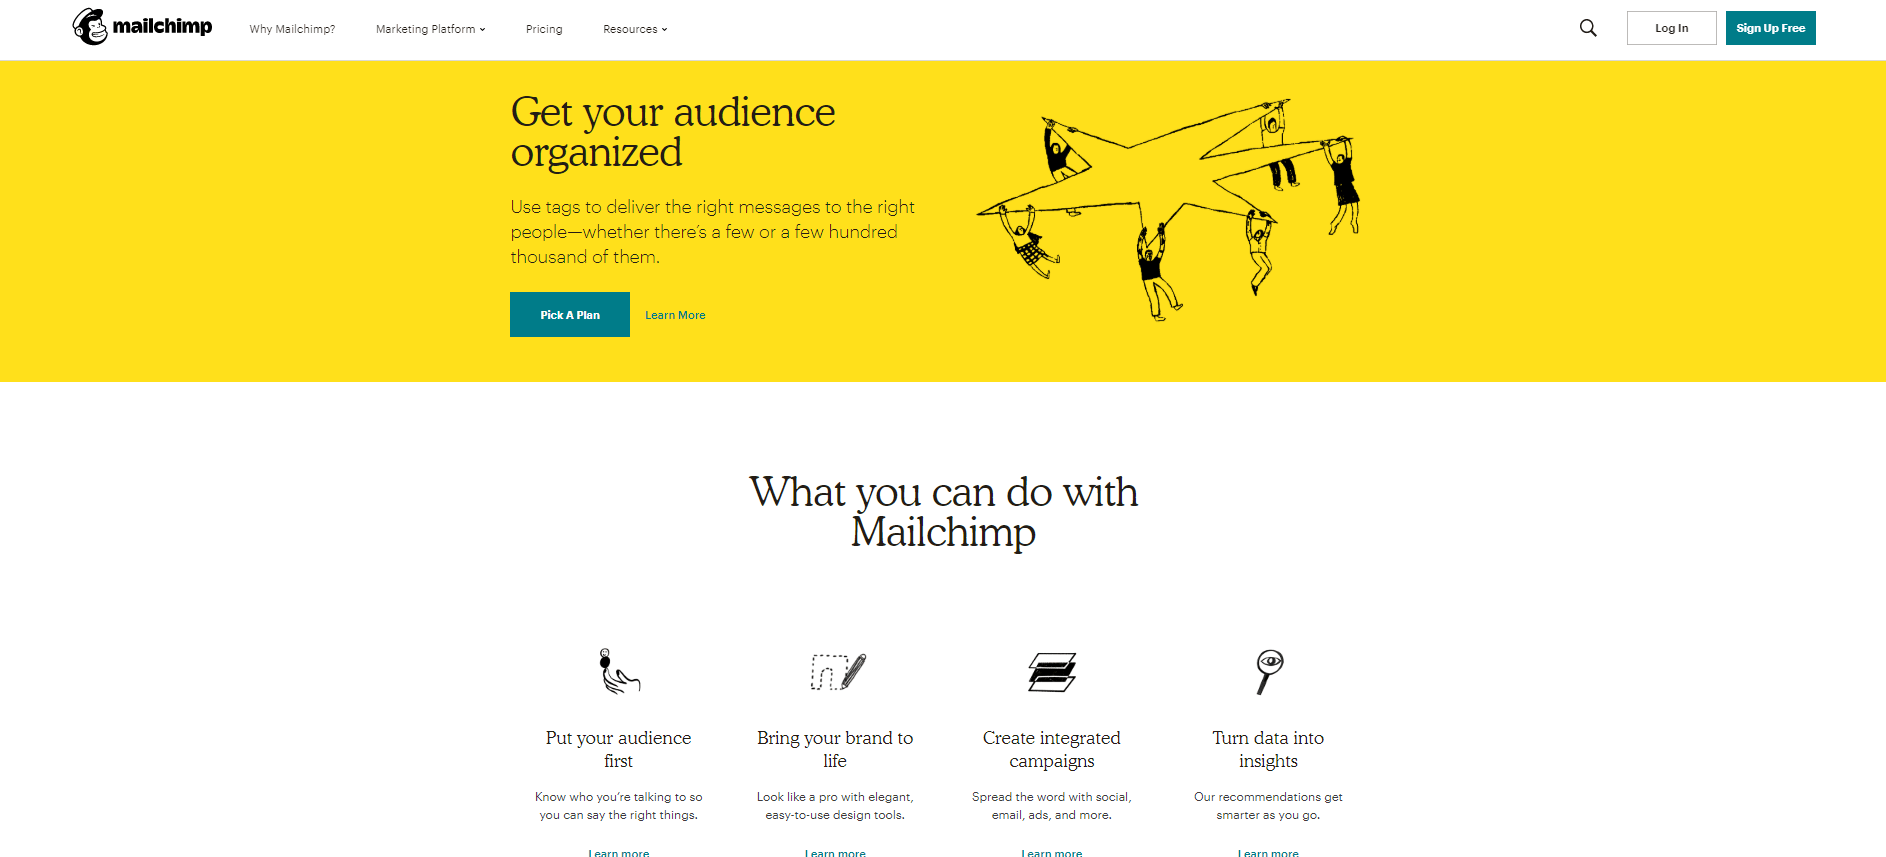 Screenshot of Mailchimp's website-a Content Marketing automation tool for Email marketing.